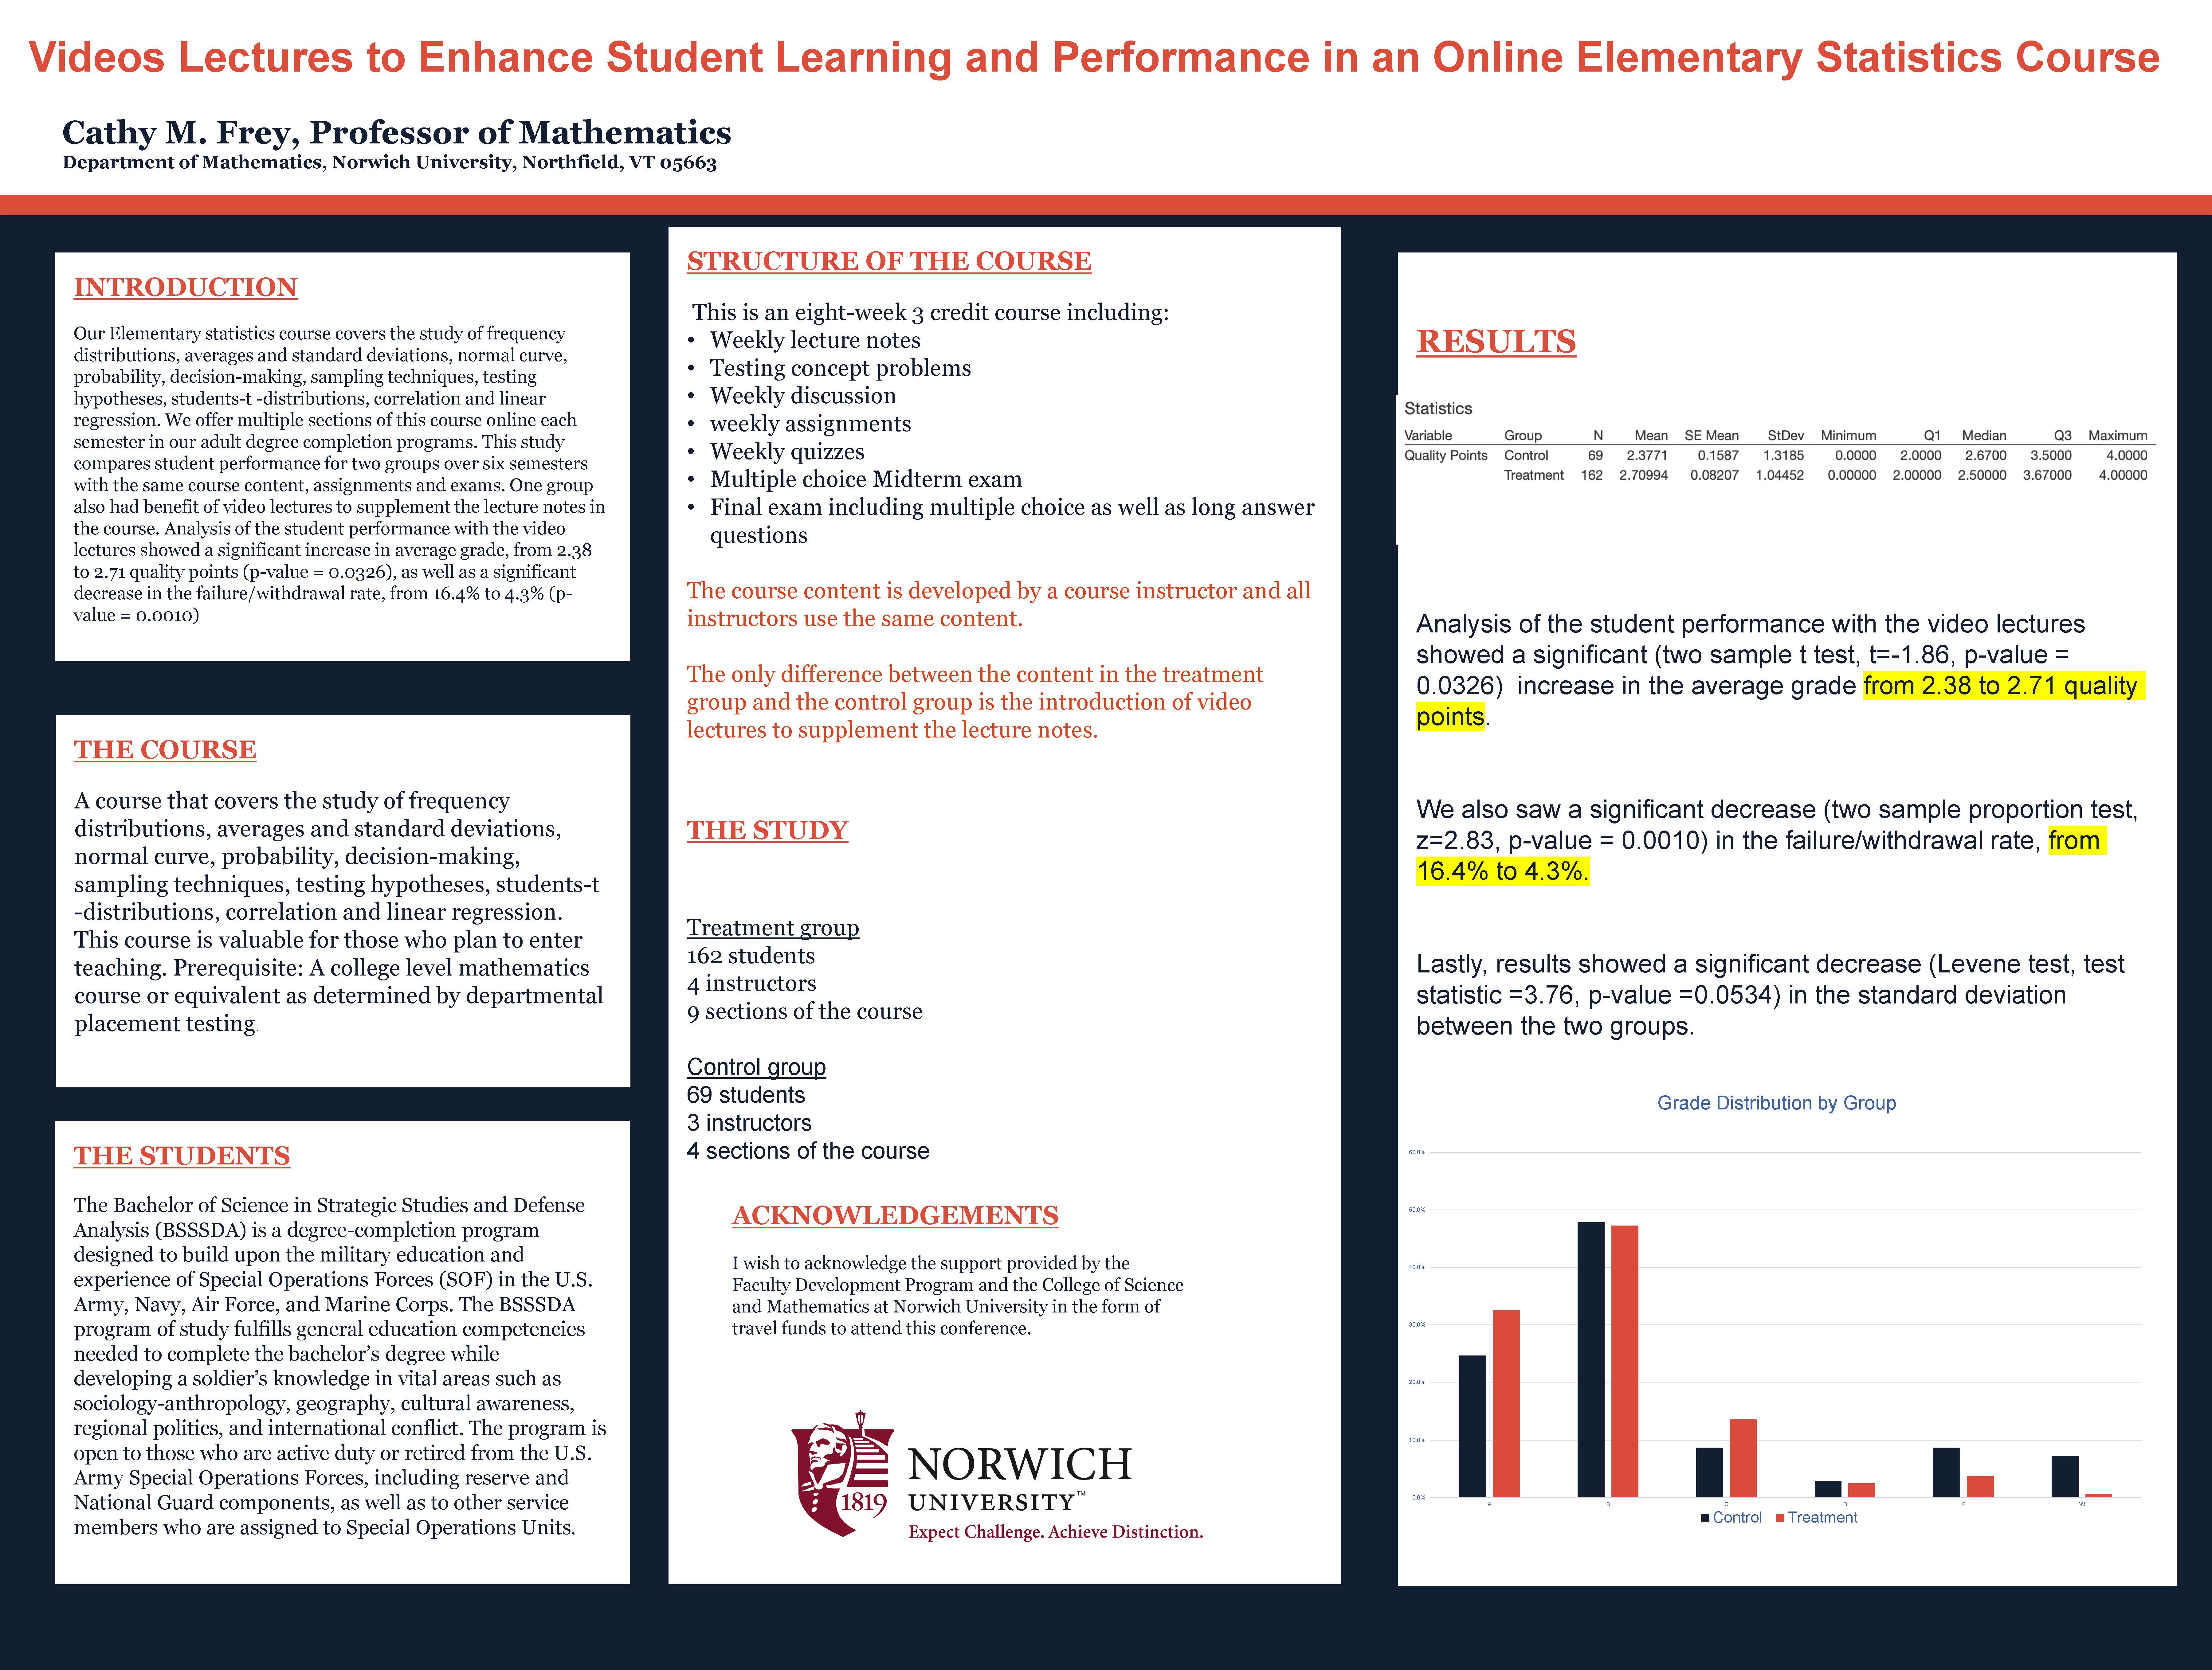 Showcase Image for Videos Lectures to Enhance Student Learning and Performance in an Online Elementary Statistics Course